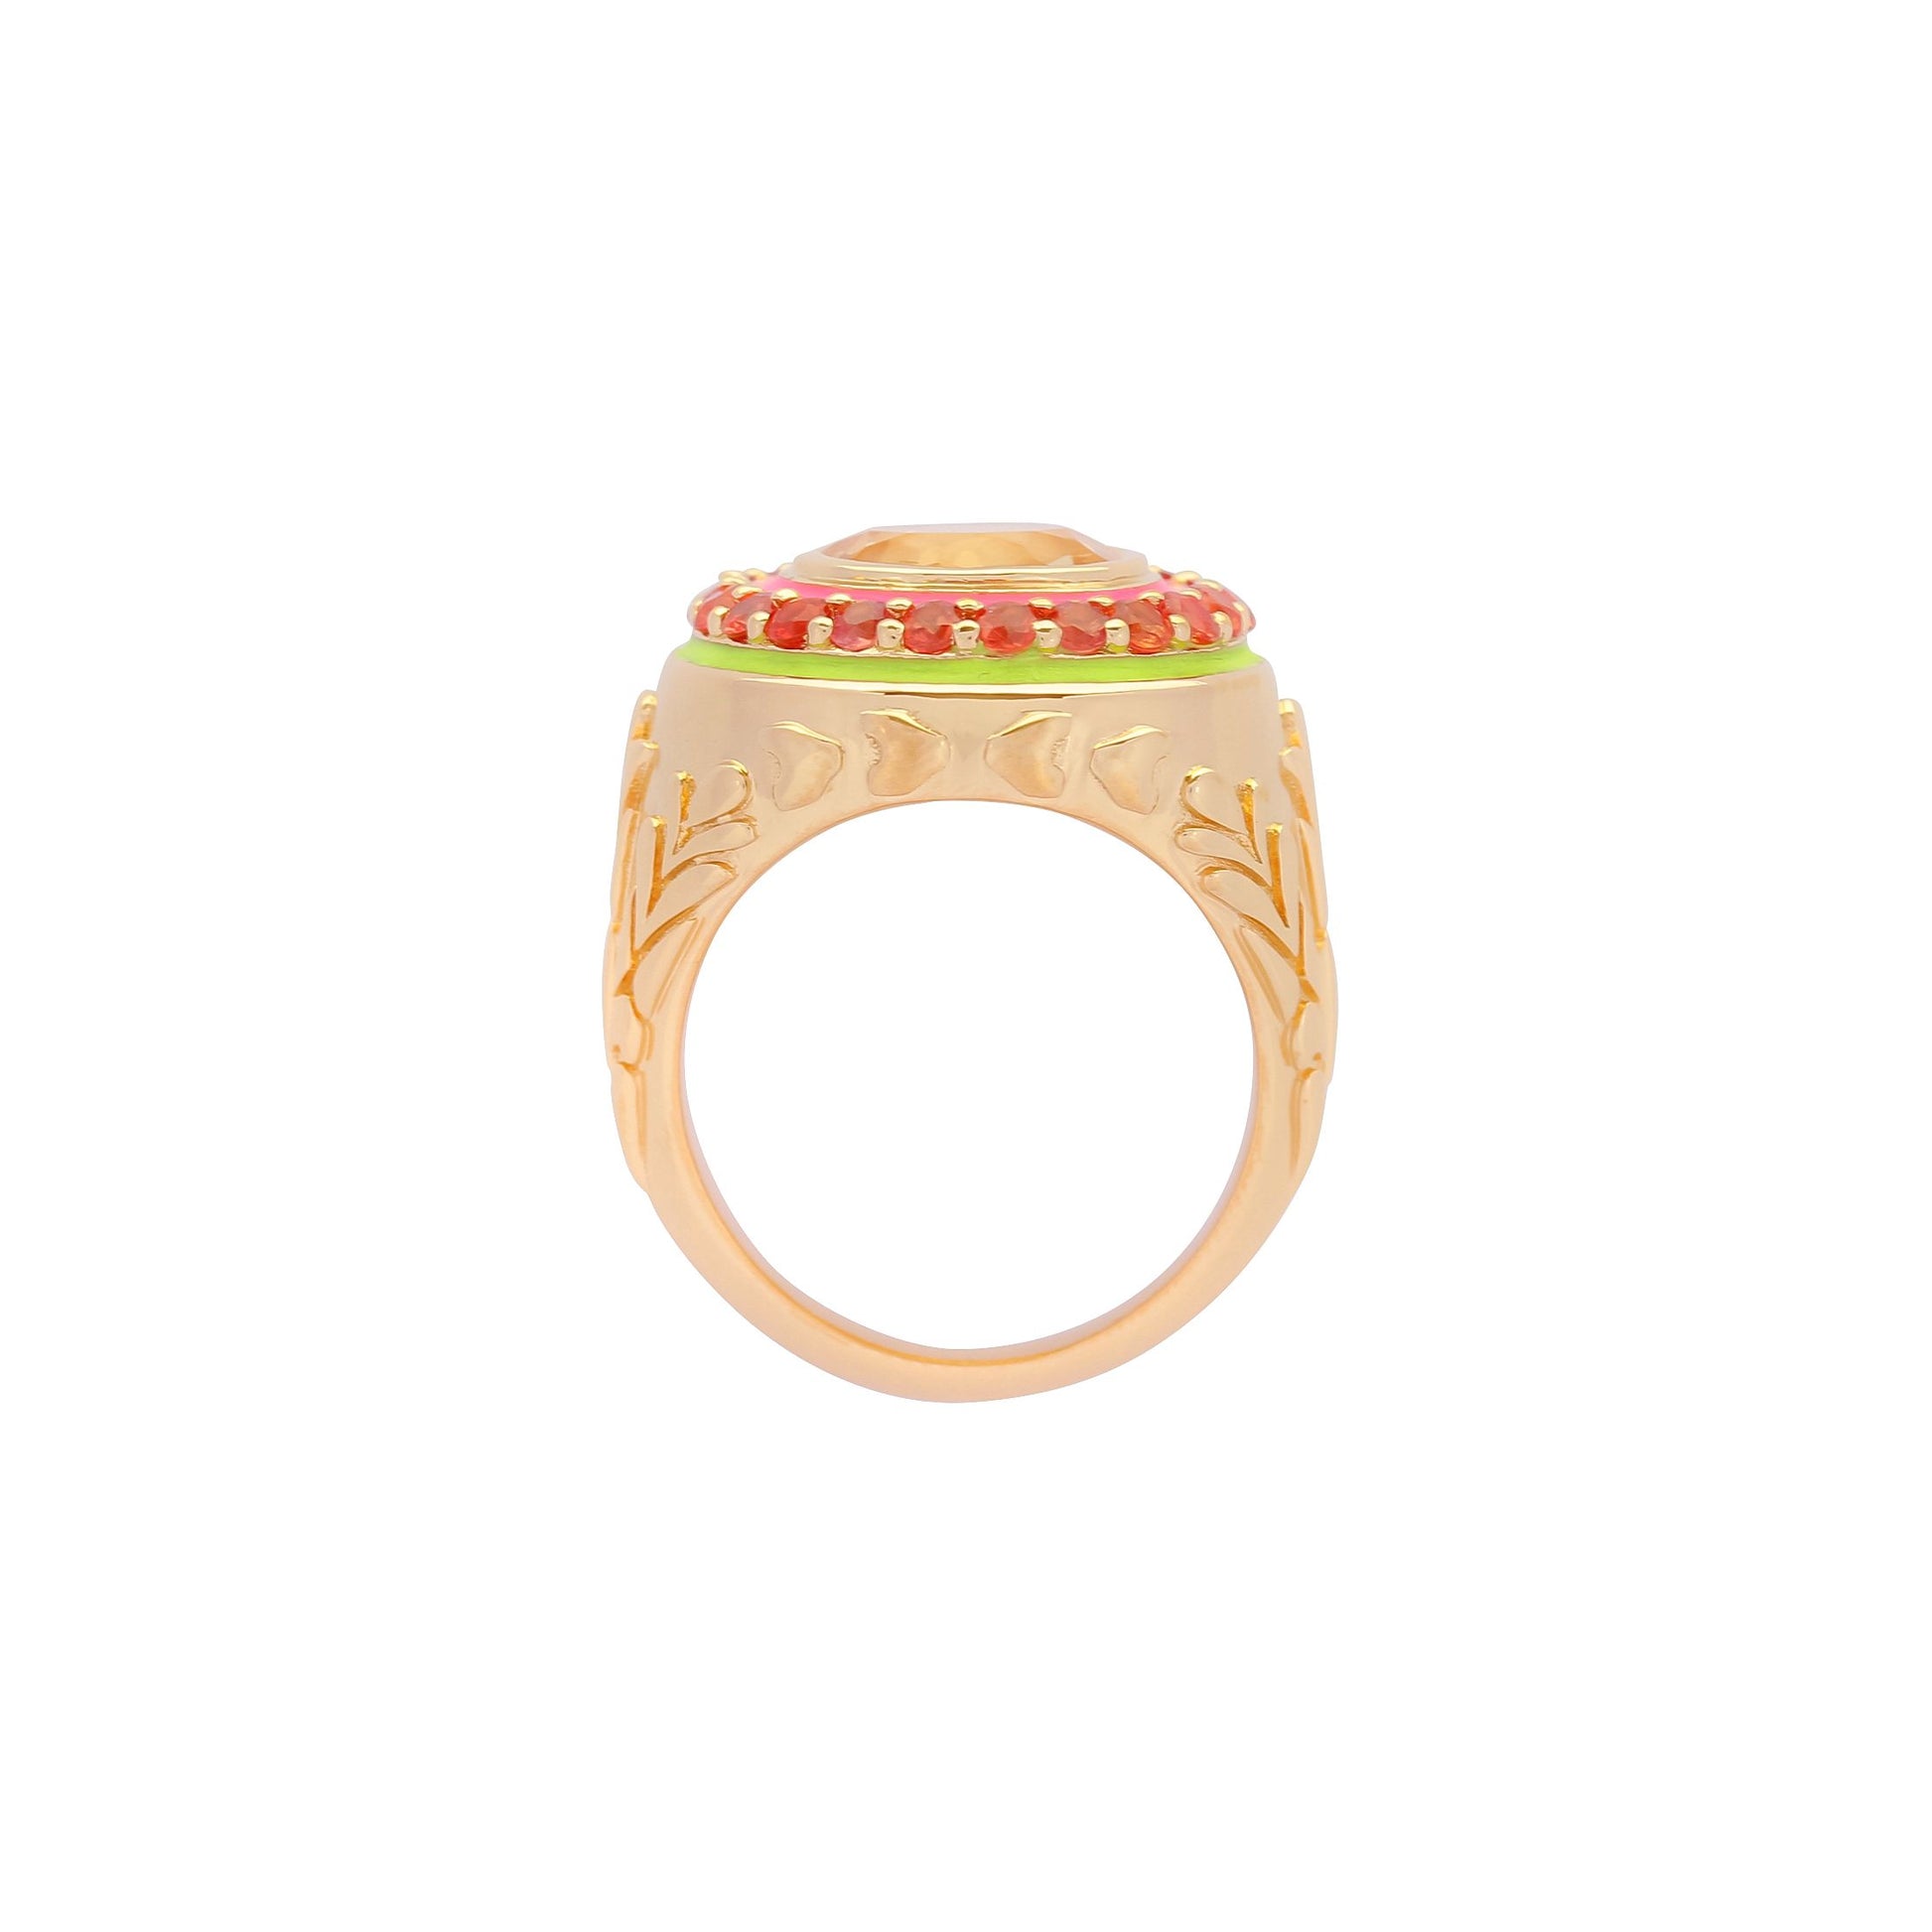 image of statement ring in orange view flat lying from above on white background 